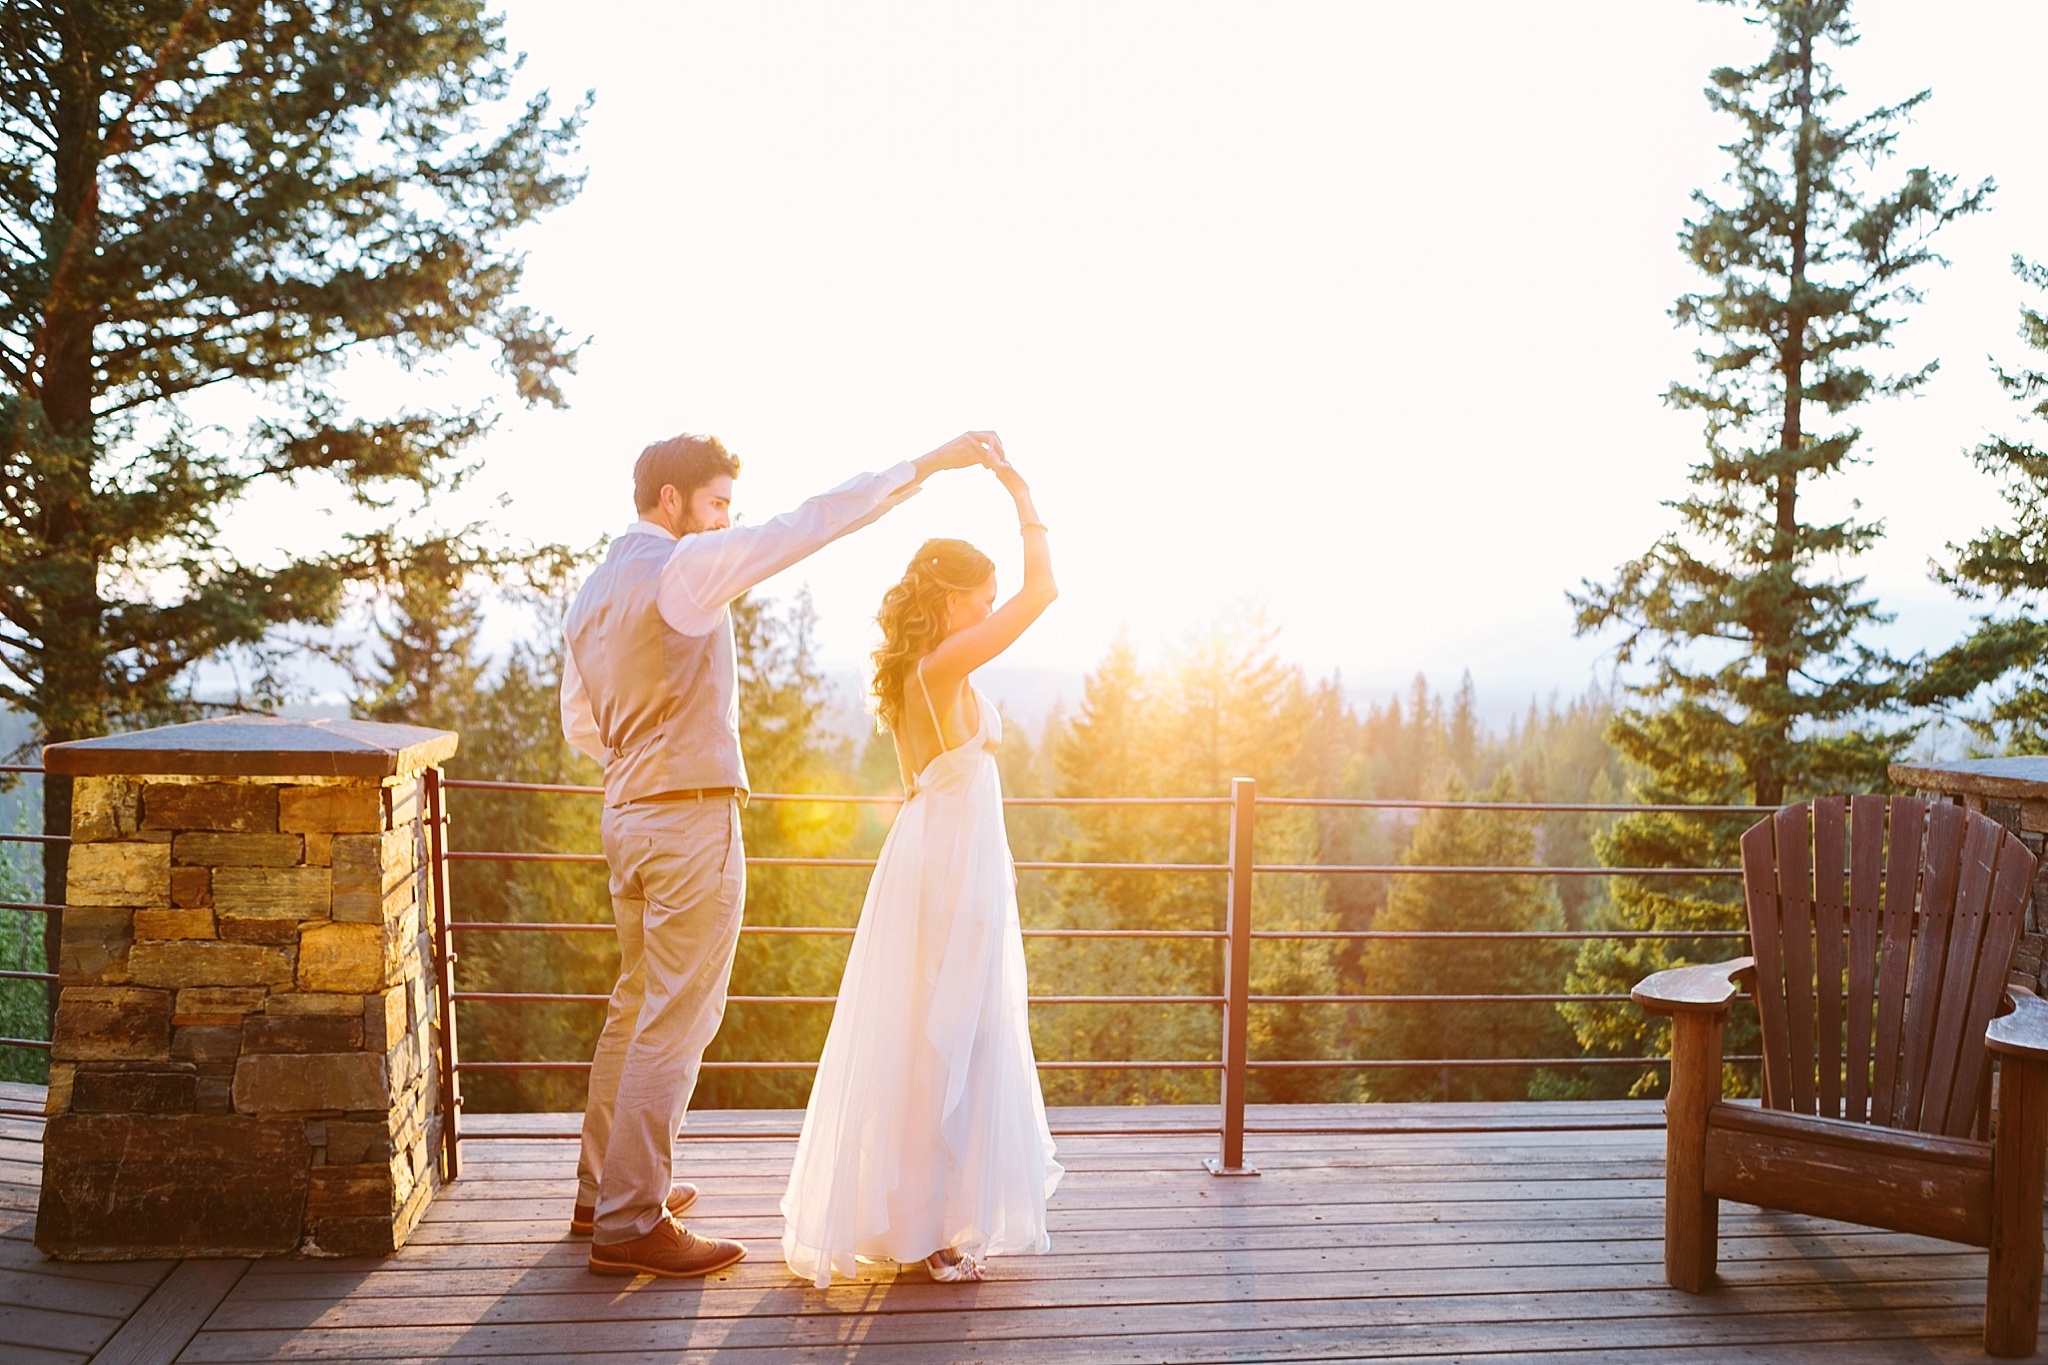 Sandpoint Idaho golf course wedding couple dancing on the porch at sunset